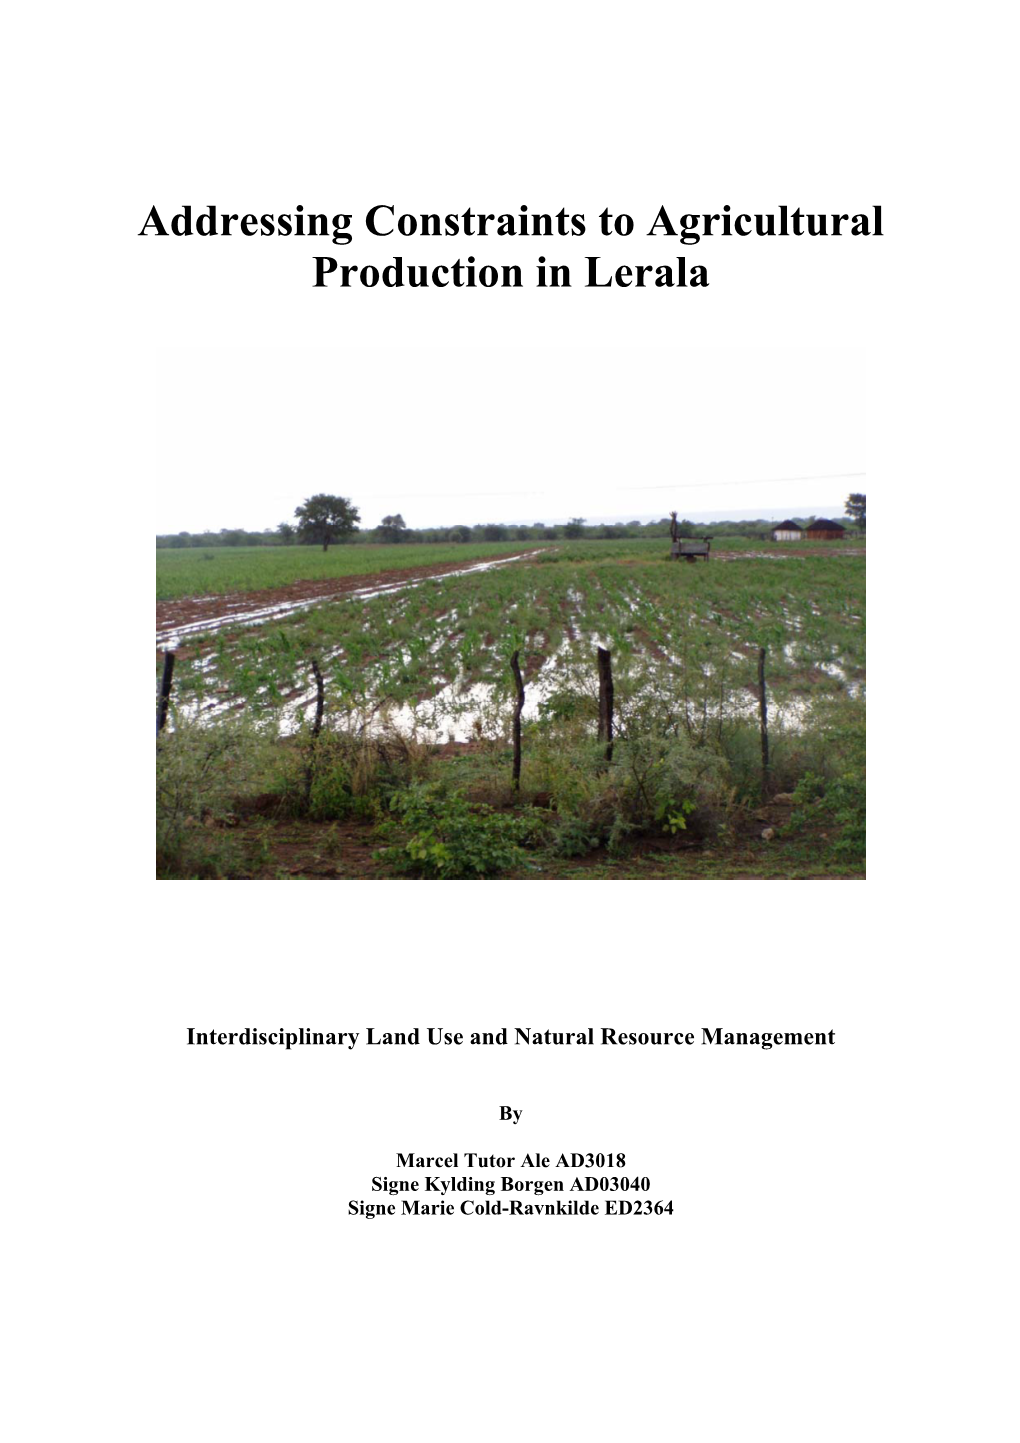 Addressing Constraints to Agricultural Production in Lerala